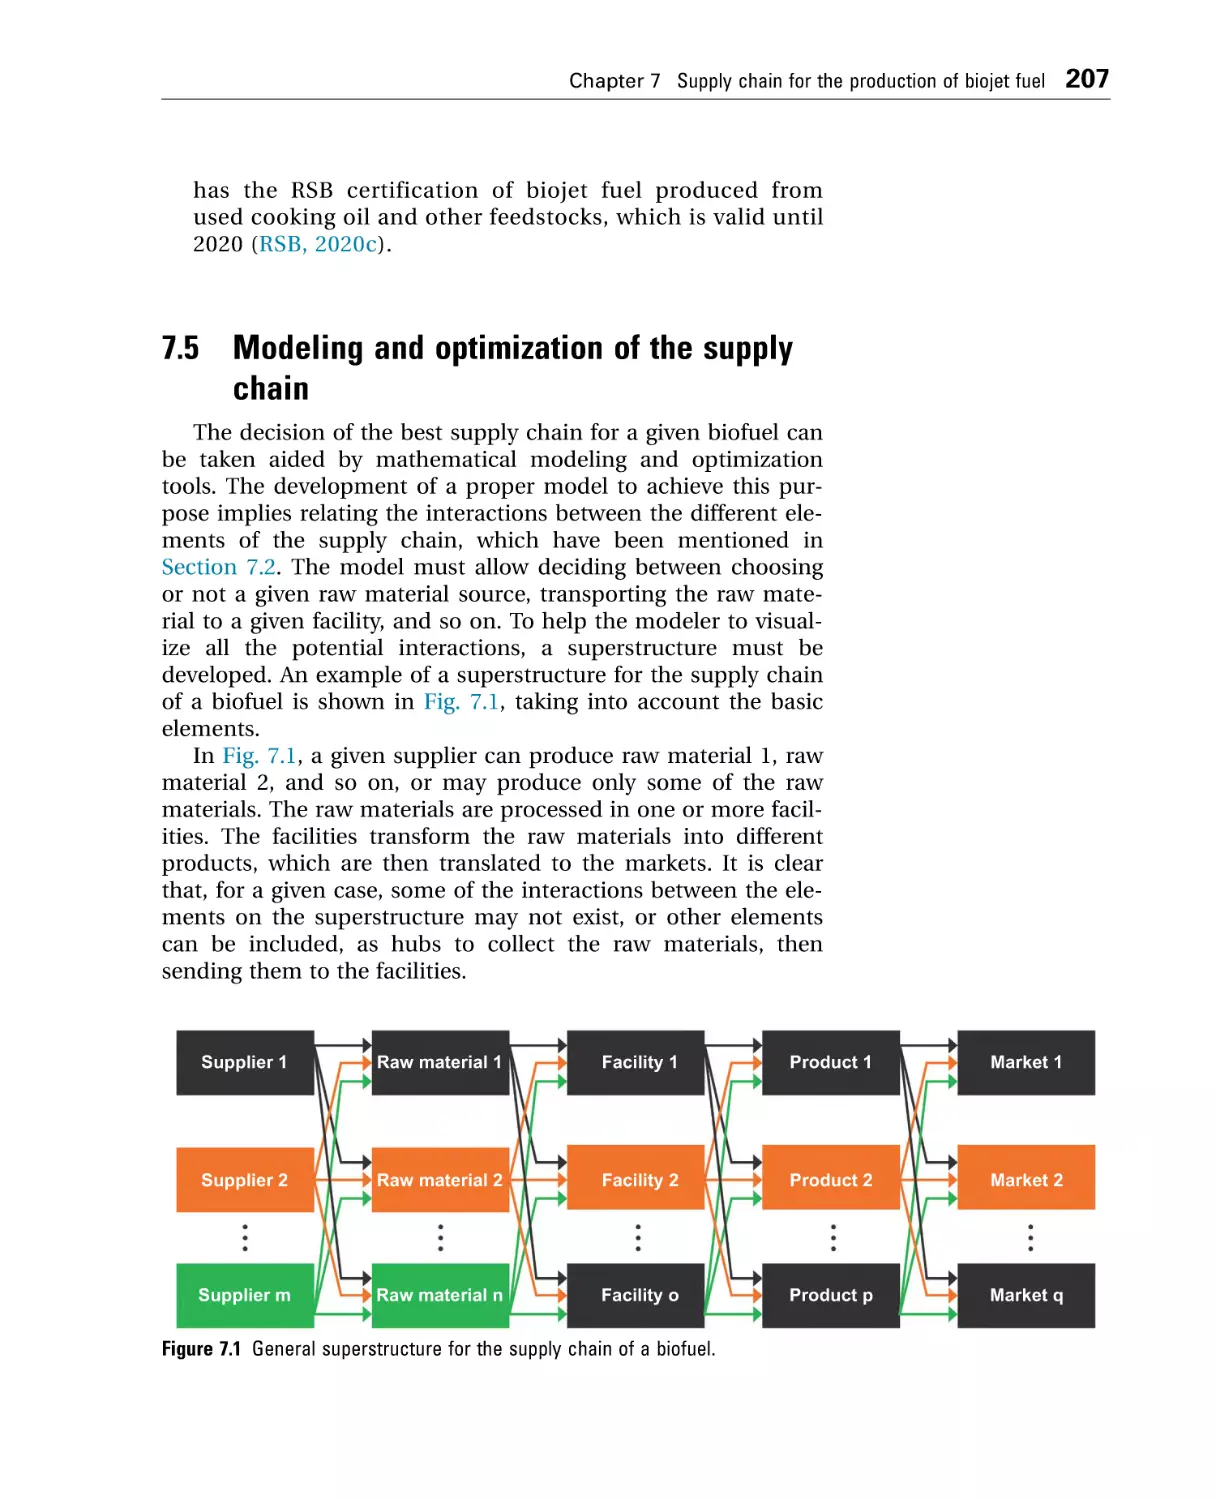 7.5 Modeling and optimization of the supply chain